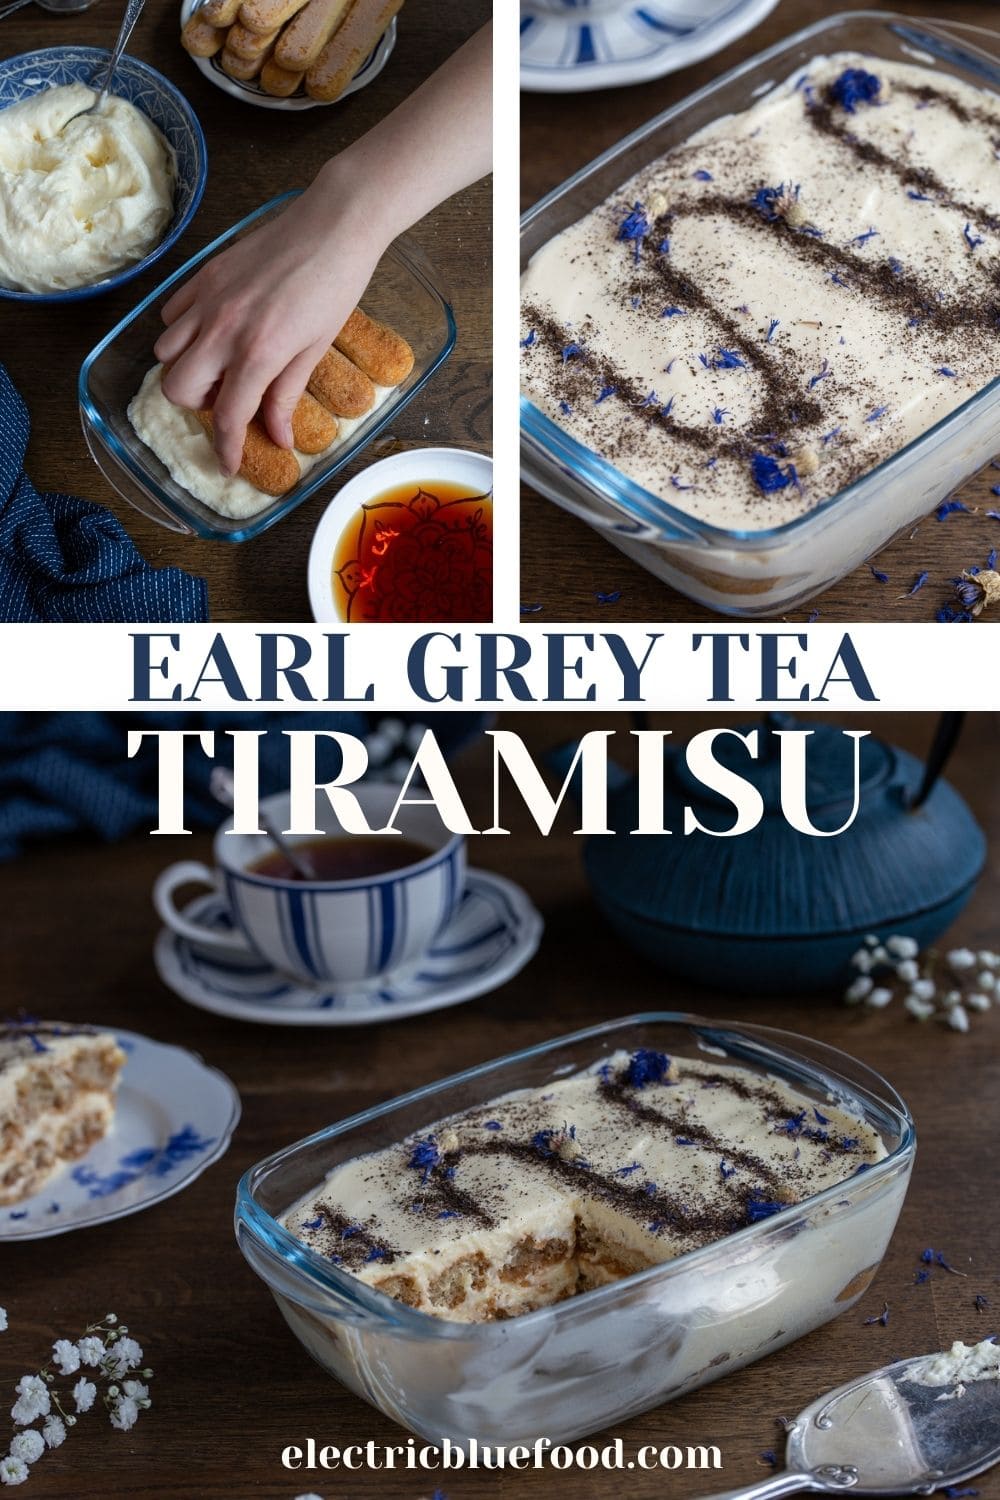 Classic tiramisu made with earl grey tea instead of coffee. This earl grey tiramisu is topped with powdered tea and cornflower petals instead of cocoa, for maximum tea flavour.